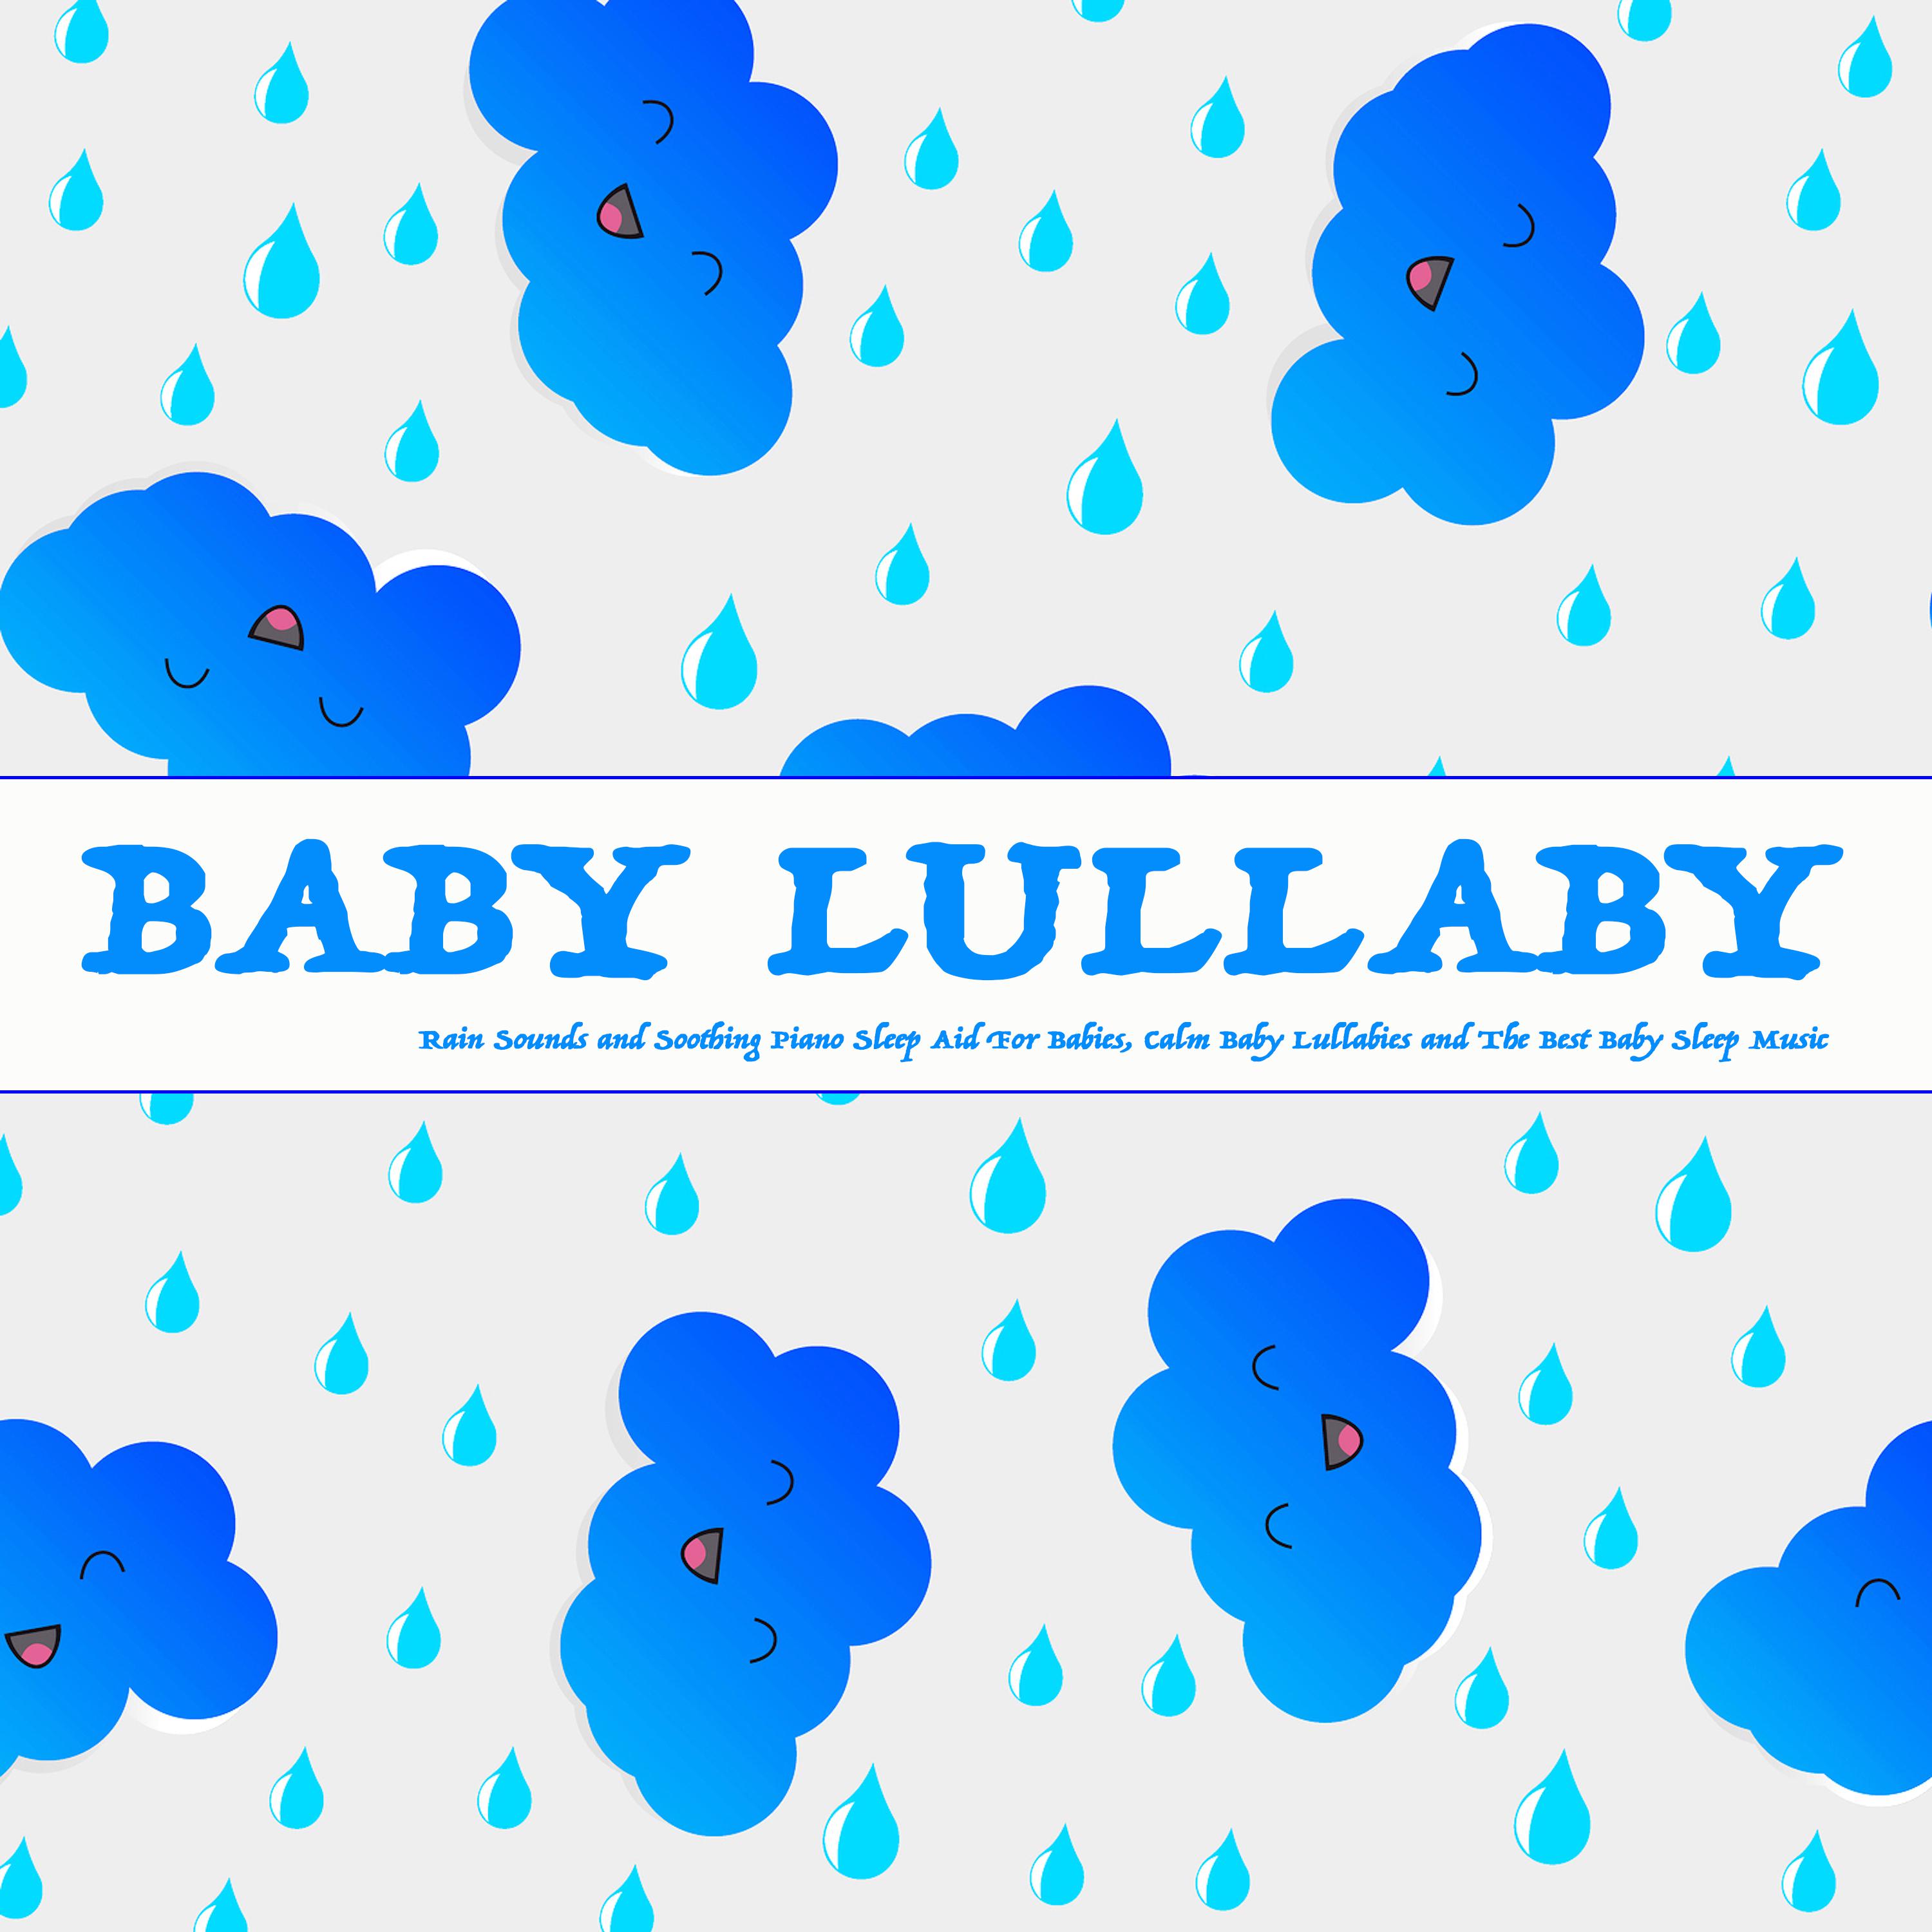 Baby Lullaby: Rain Sounds and Soothing Piano Sleep Aid For Babies, Calm Baby Lullabies and The Best Baby Sleep Music